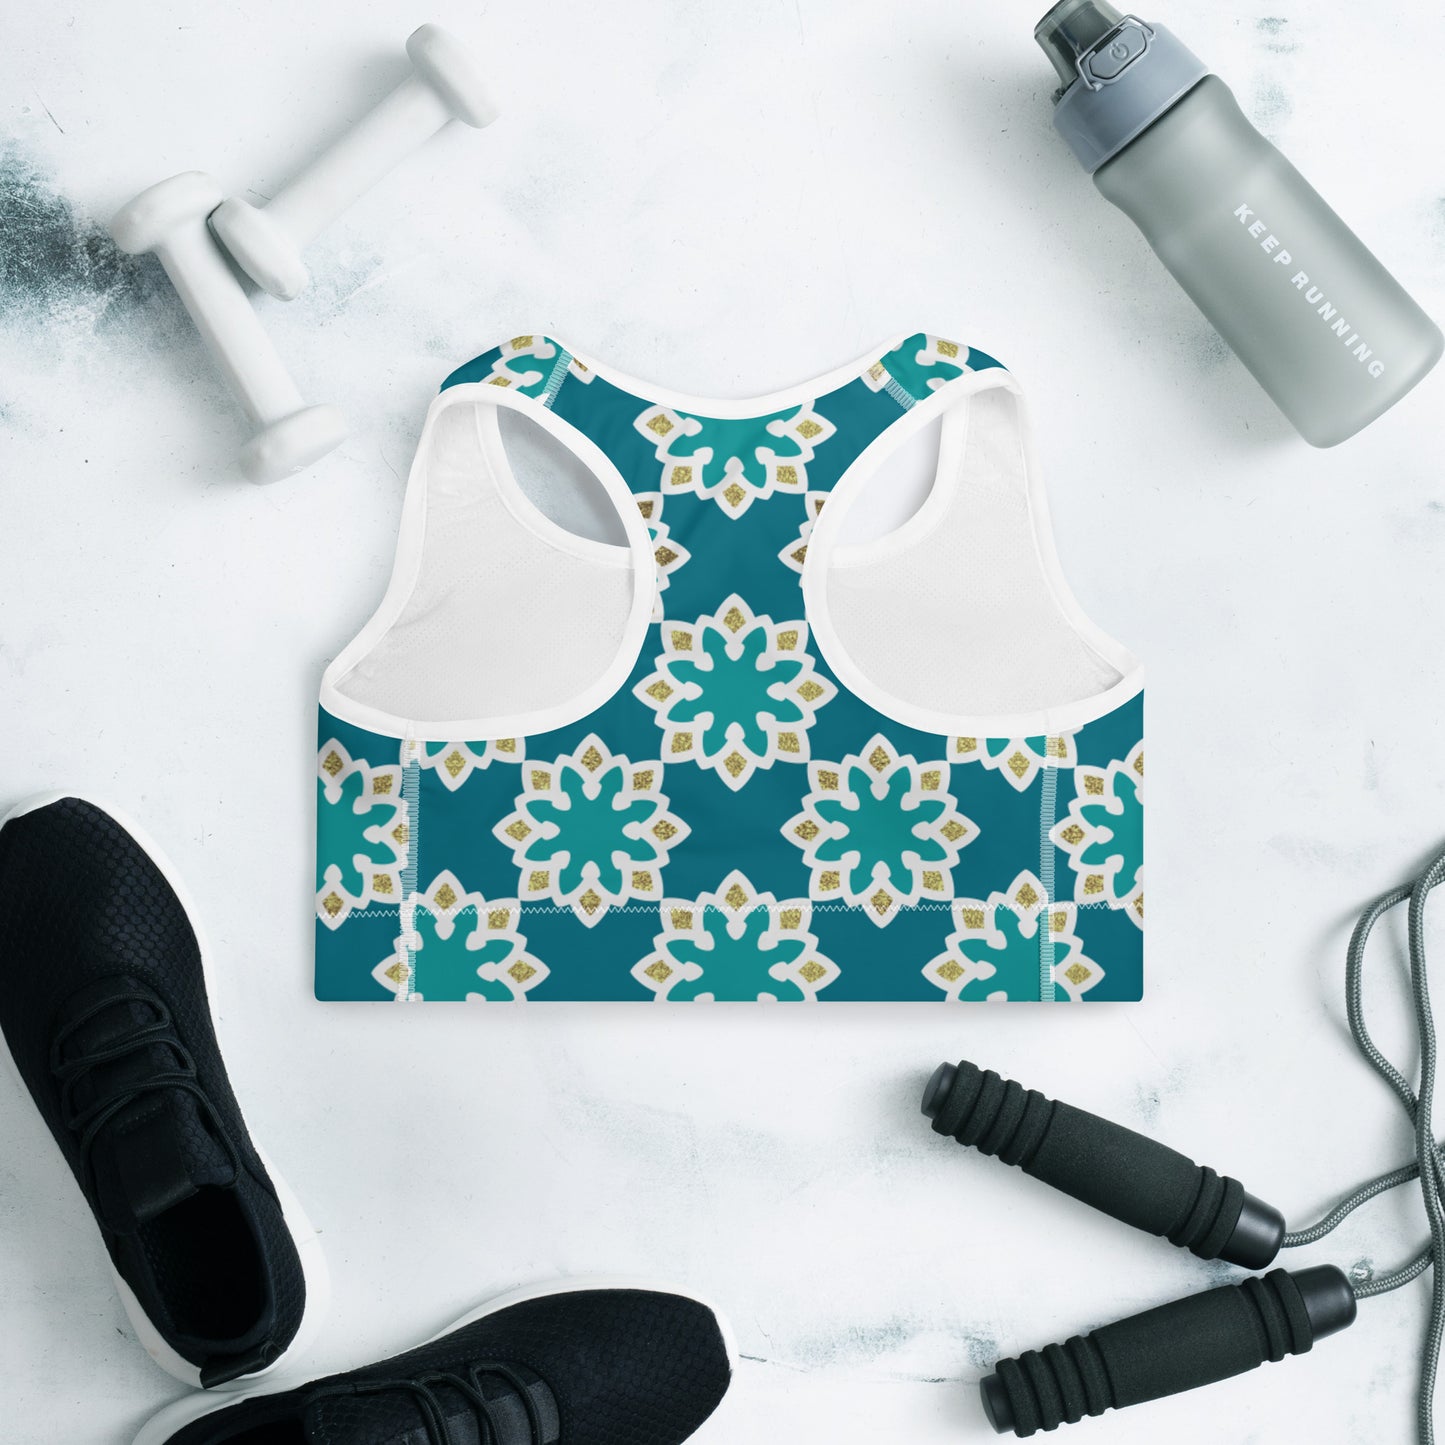 Padded Sports Bra - Arabesque flowers in Aqua and Gold